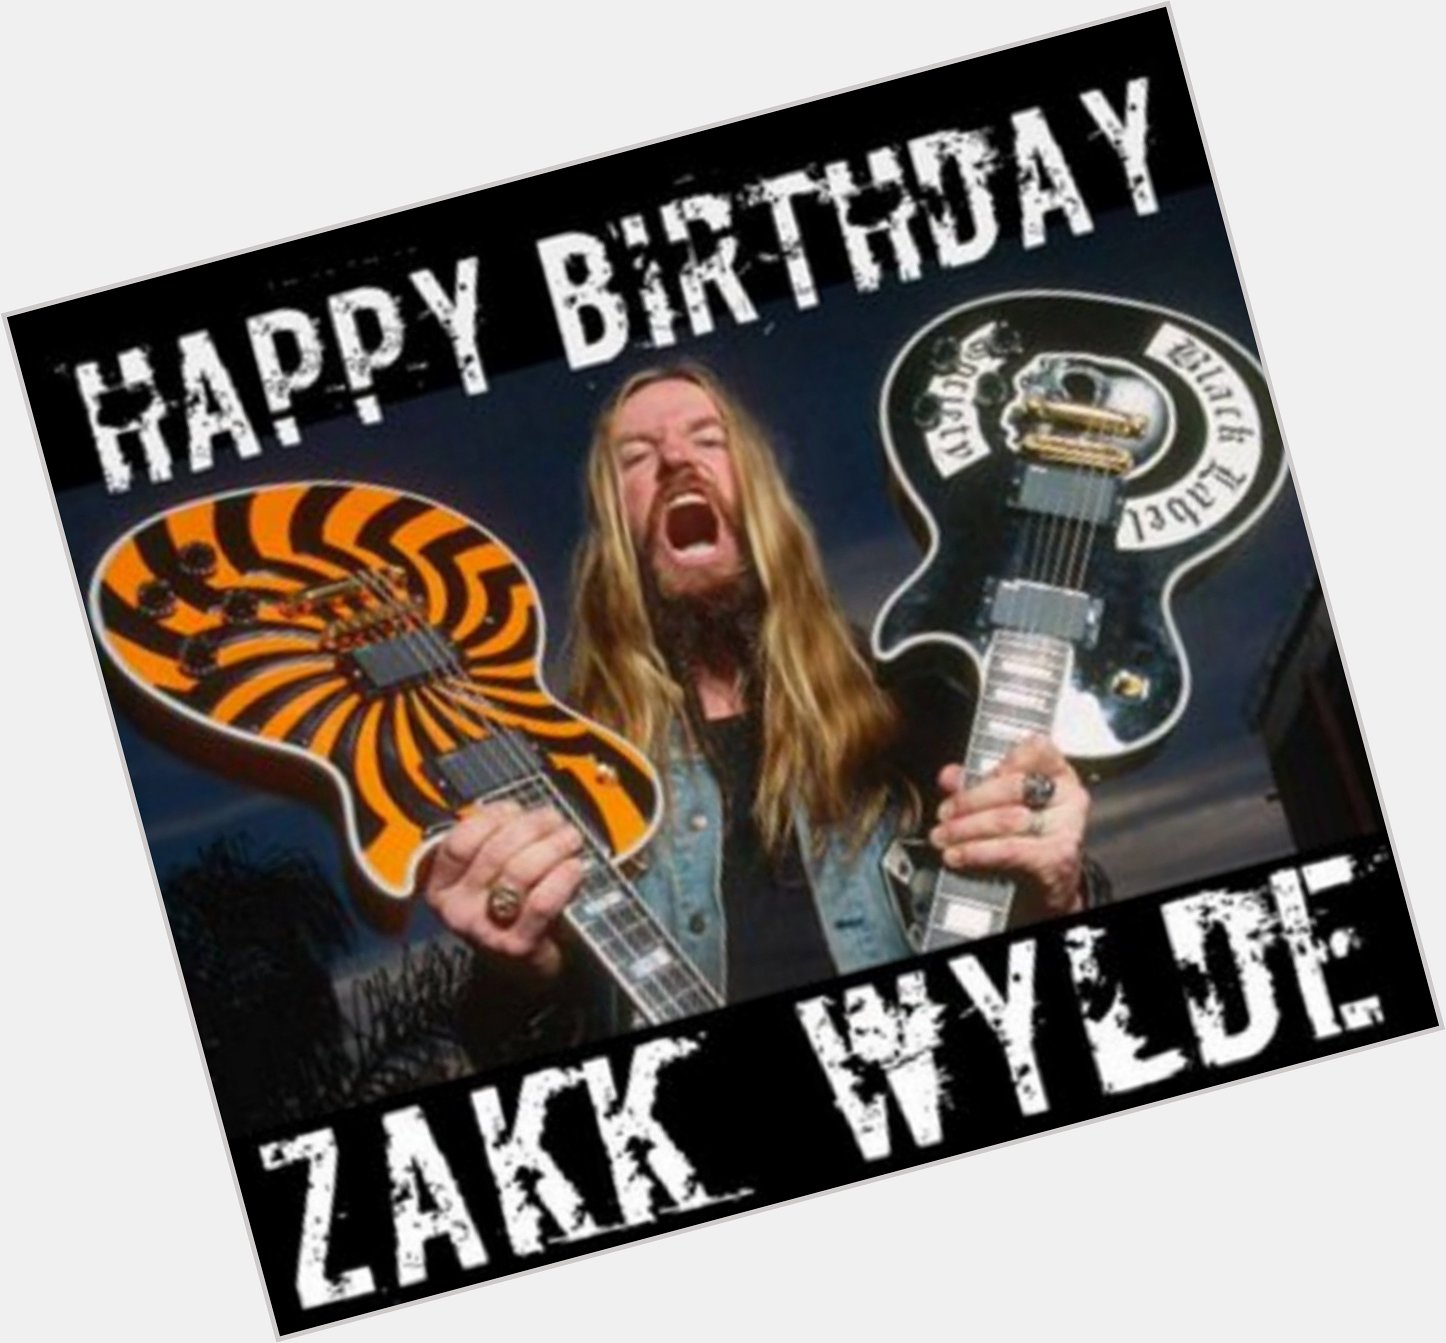 A very special Happy Birthday today to one of my biggest influences, inspirations and heros Zakk Wylde is 50 today. 